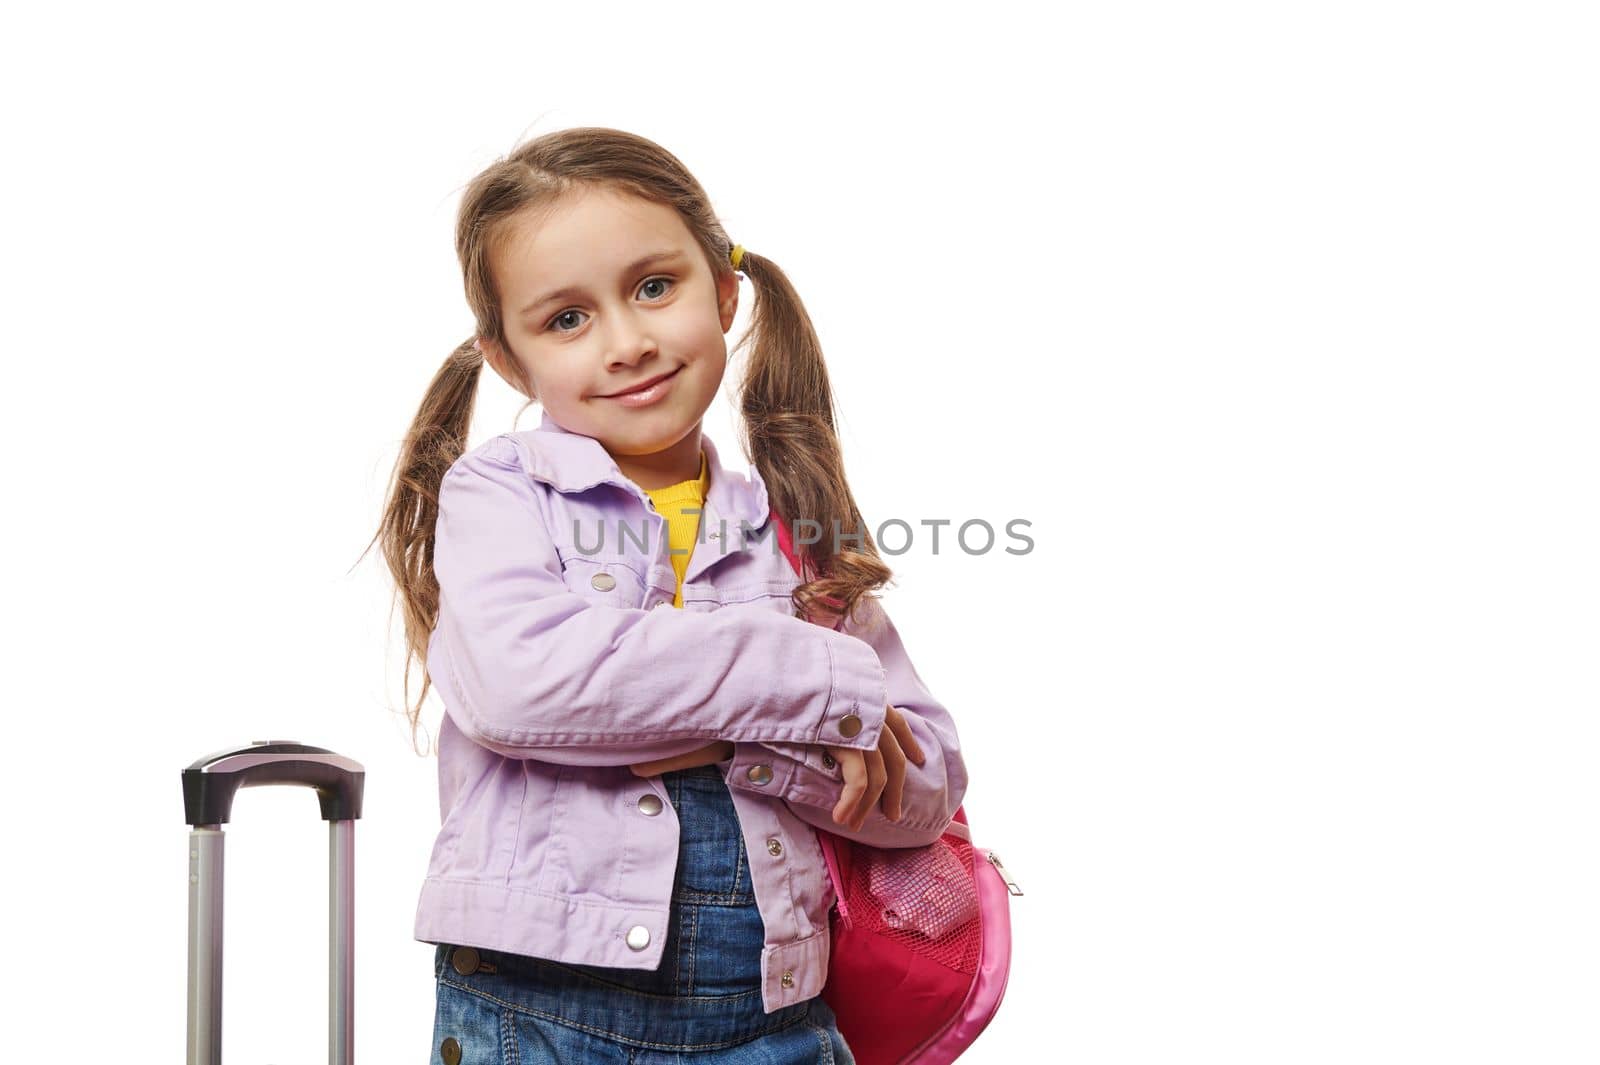 Caucasian preschooler lovely little traveler girl with two ponytails, dressed in purple jacket and blue denim overalls, smiling at camera, posing with pink backpack and suitcase on white background.